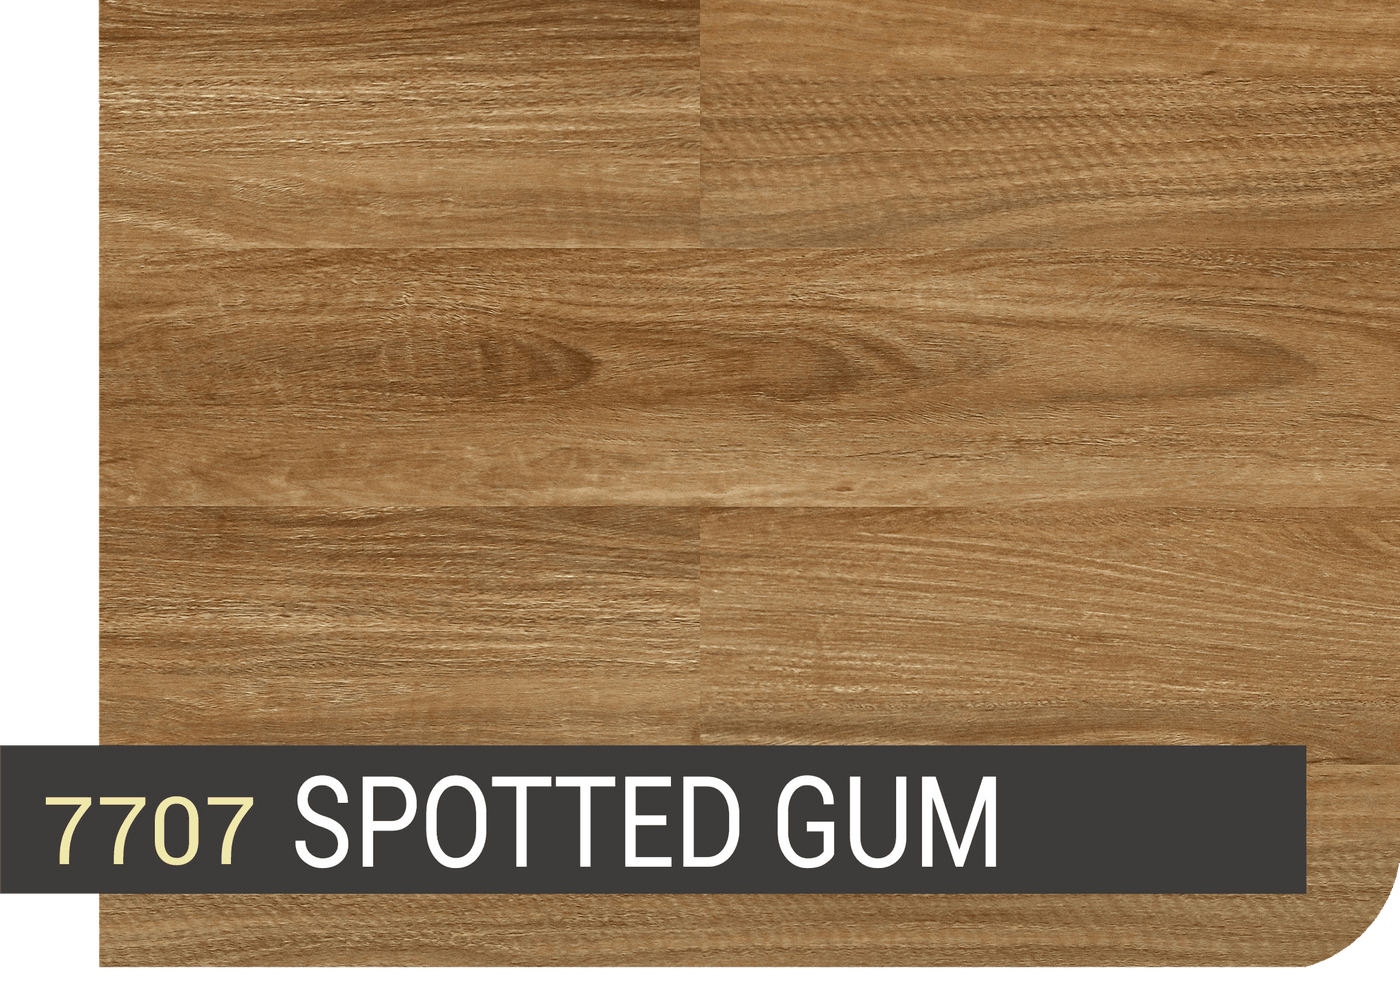 Legend Prime Laminate - Spotted Gum - Water Resistant Dyna-Core, 5G locking system, AC5, 2200x239x12.3mm